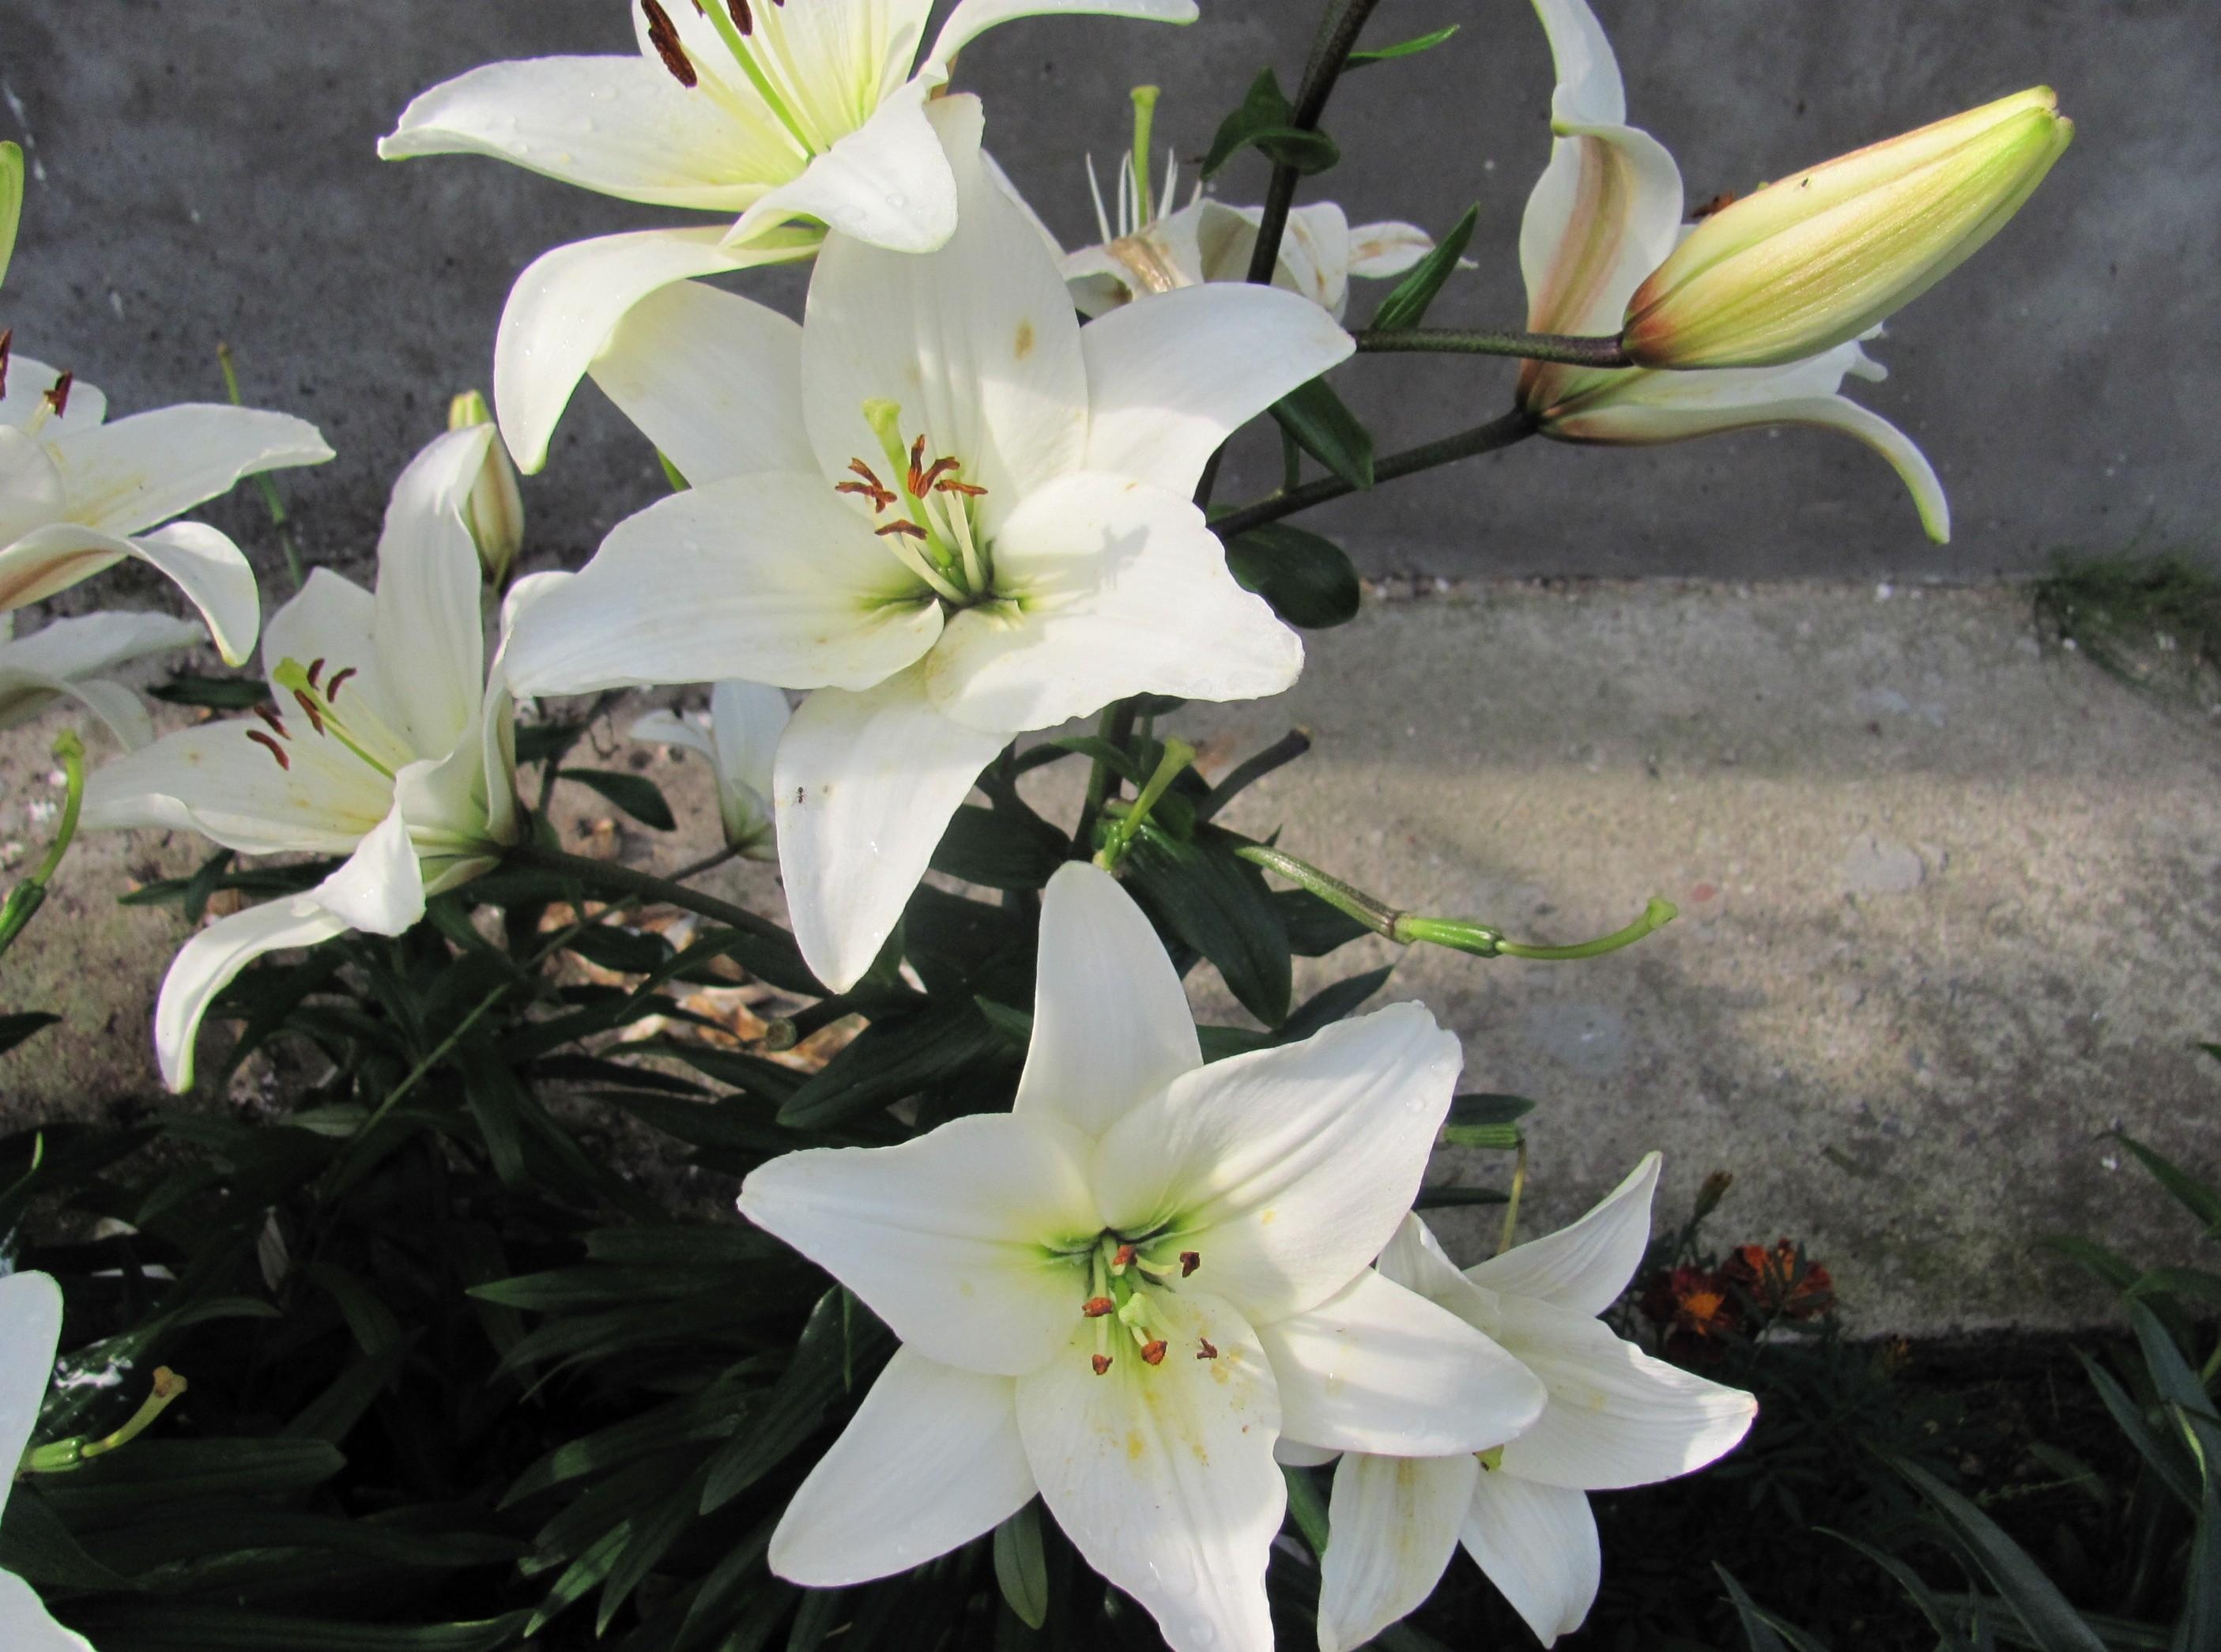 lilies, snow white, flowers, white, bud, greens, flower bed, flowerbed